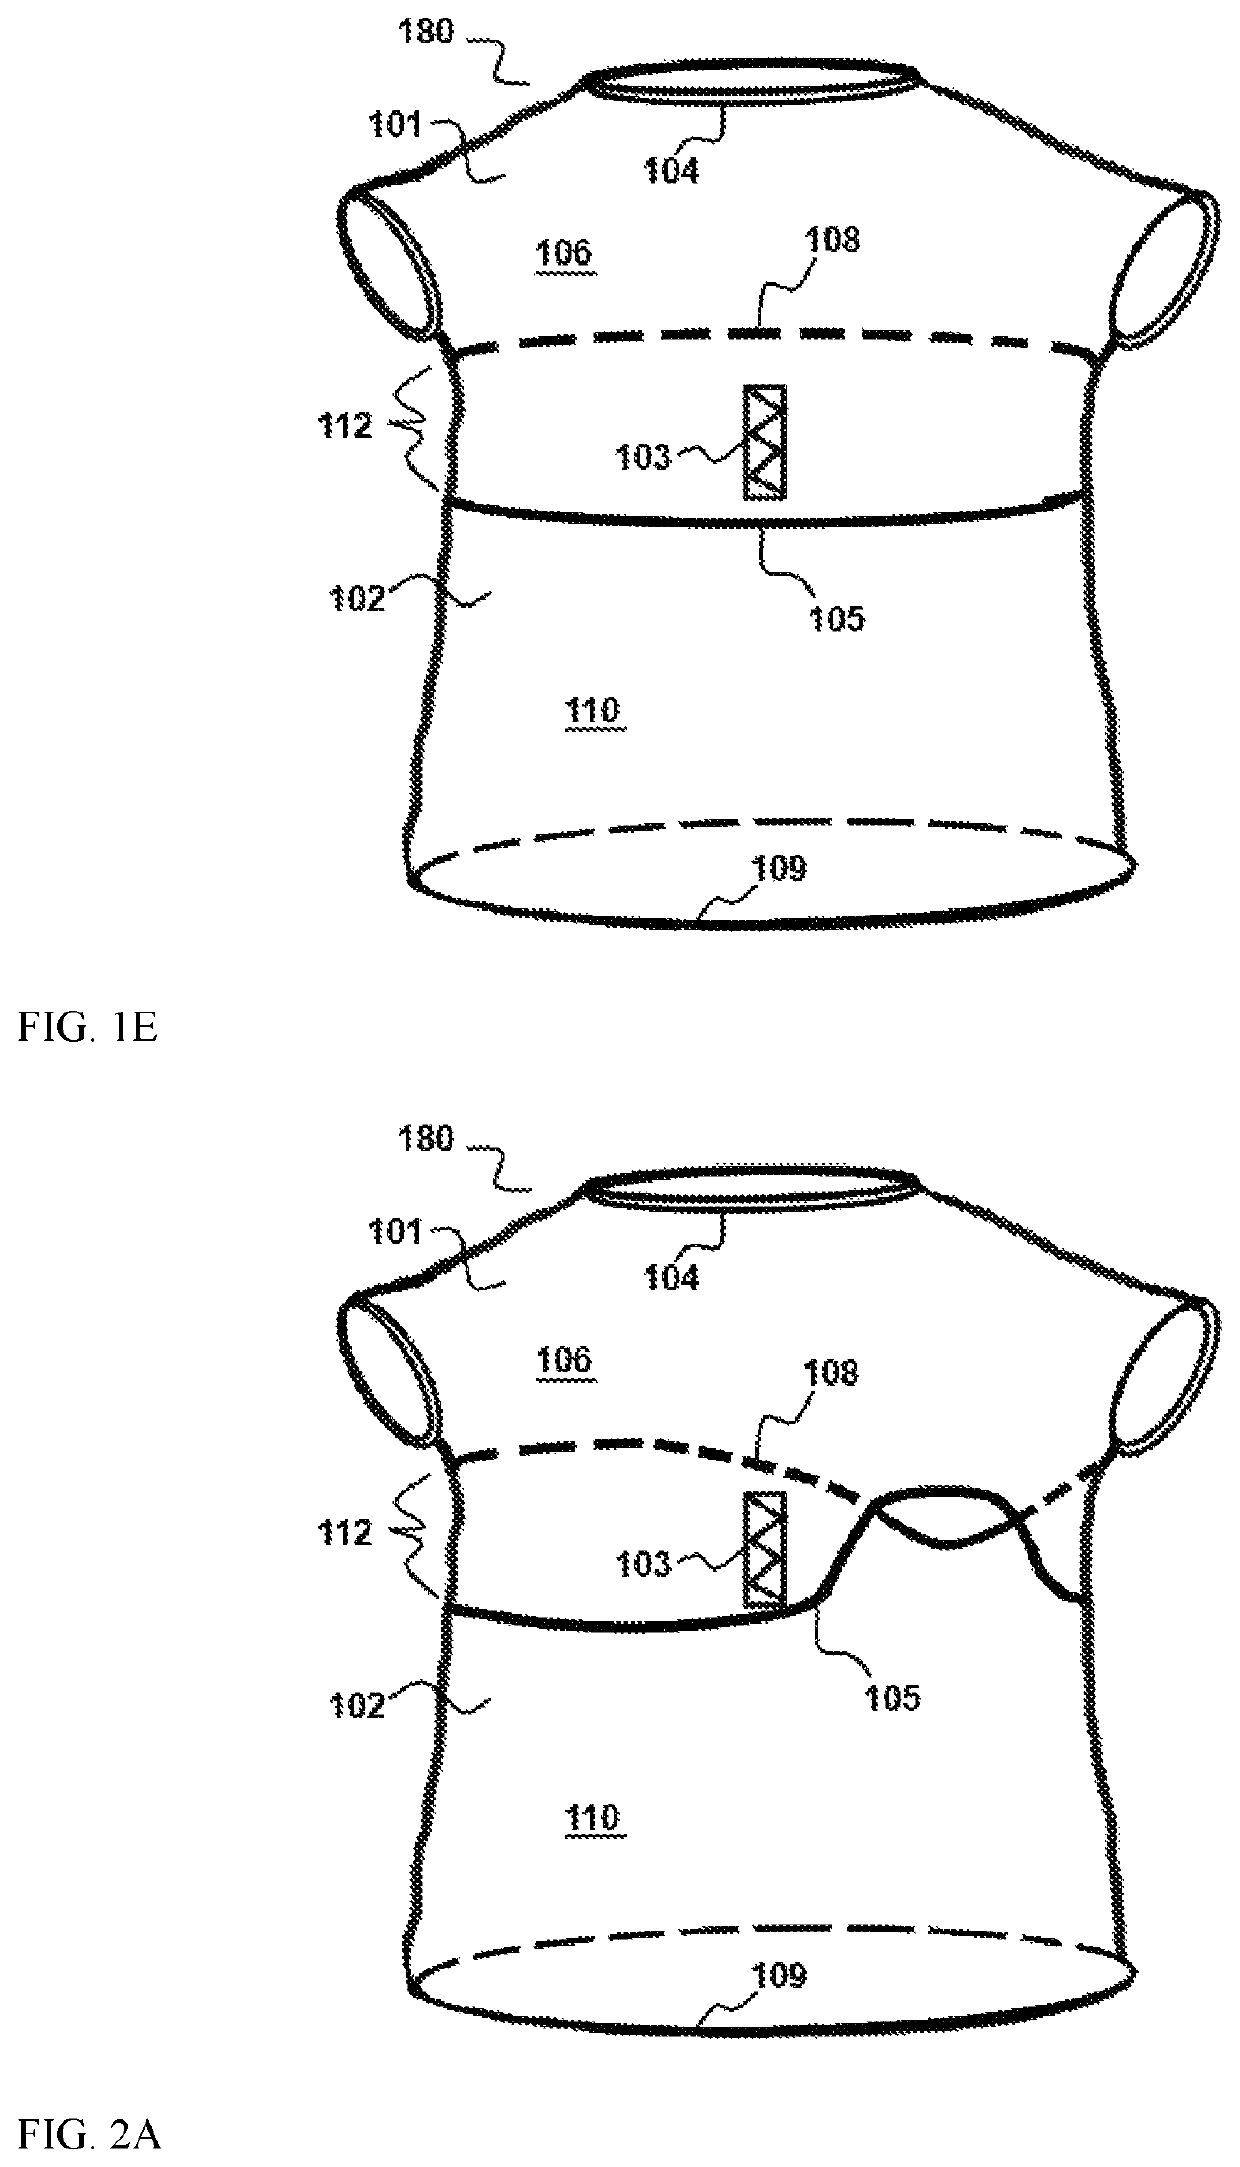 Article of clothing suitable for nursing of children